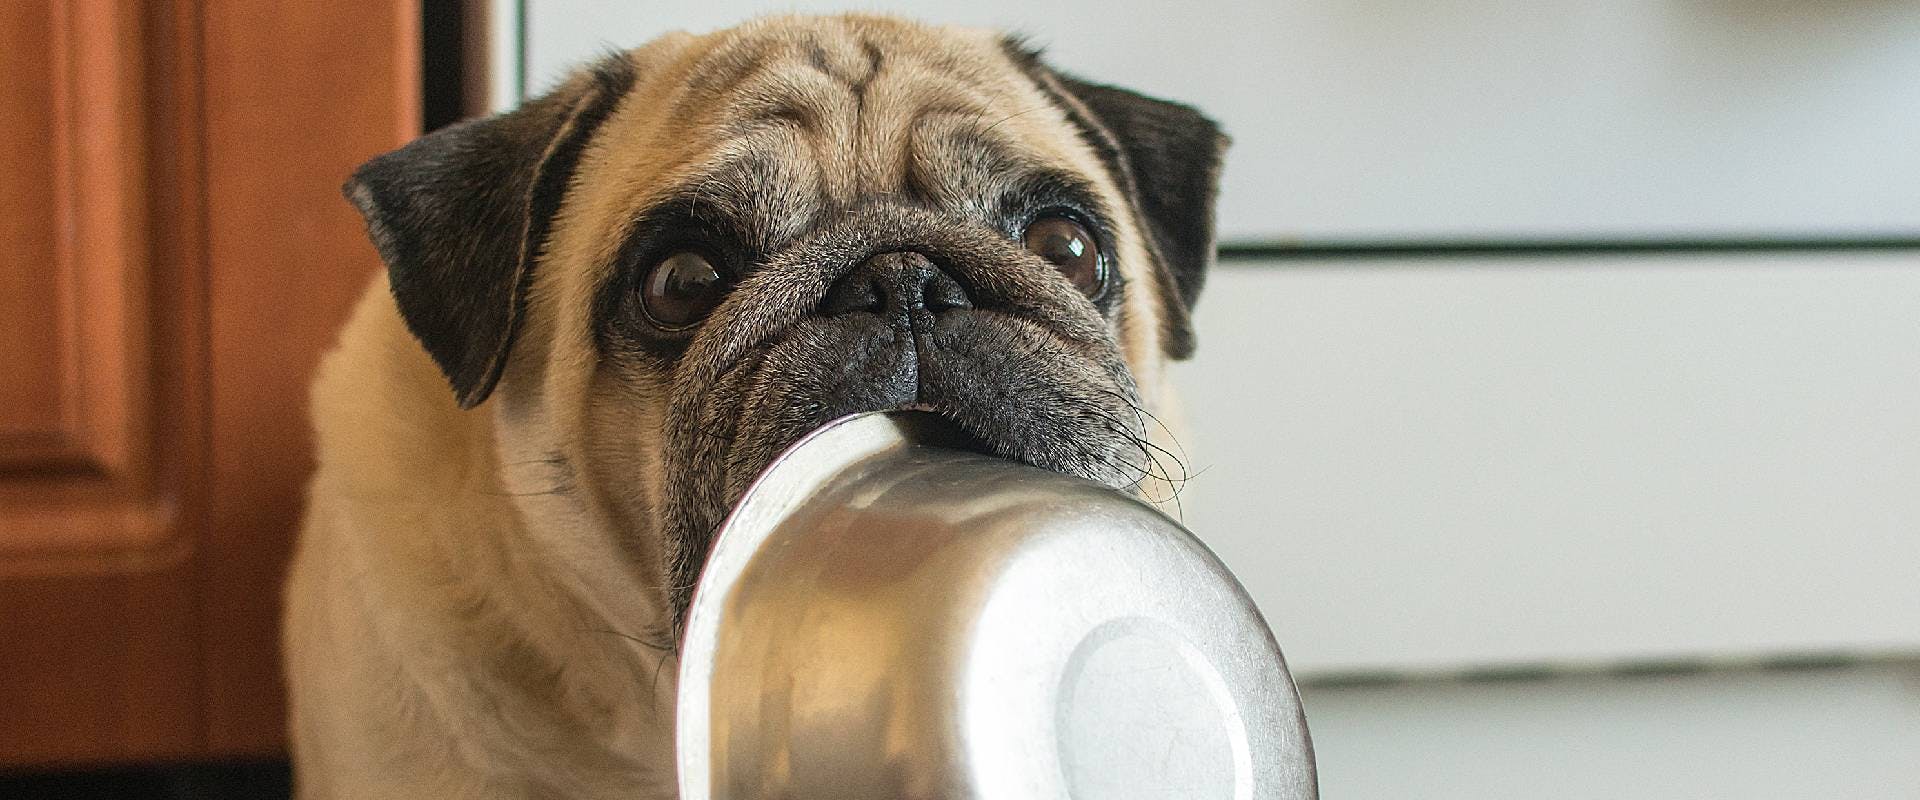 Pug puppy with a bowl in their mouth